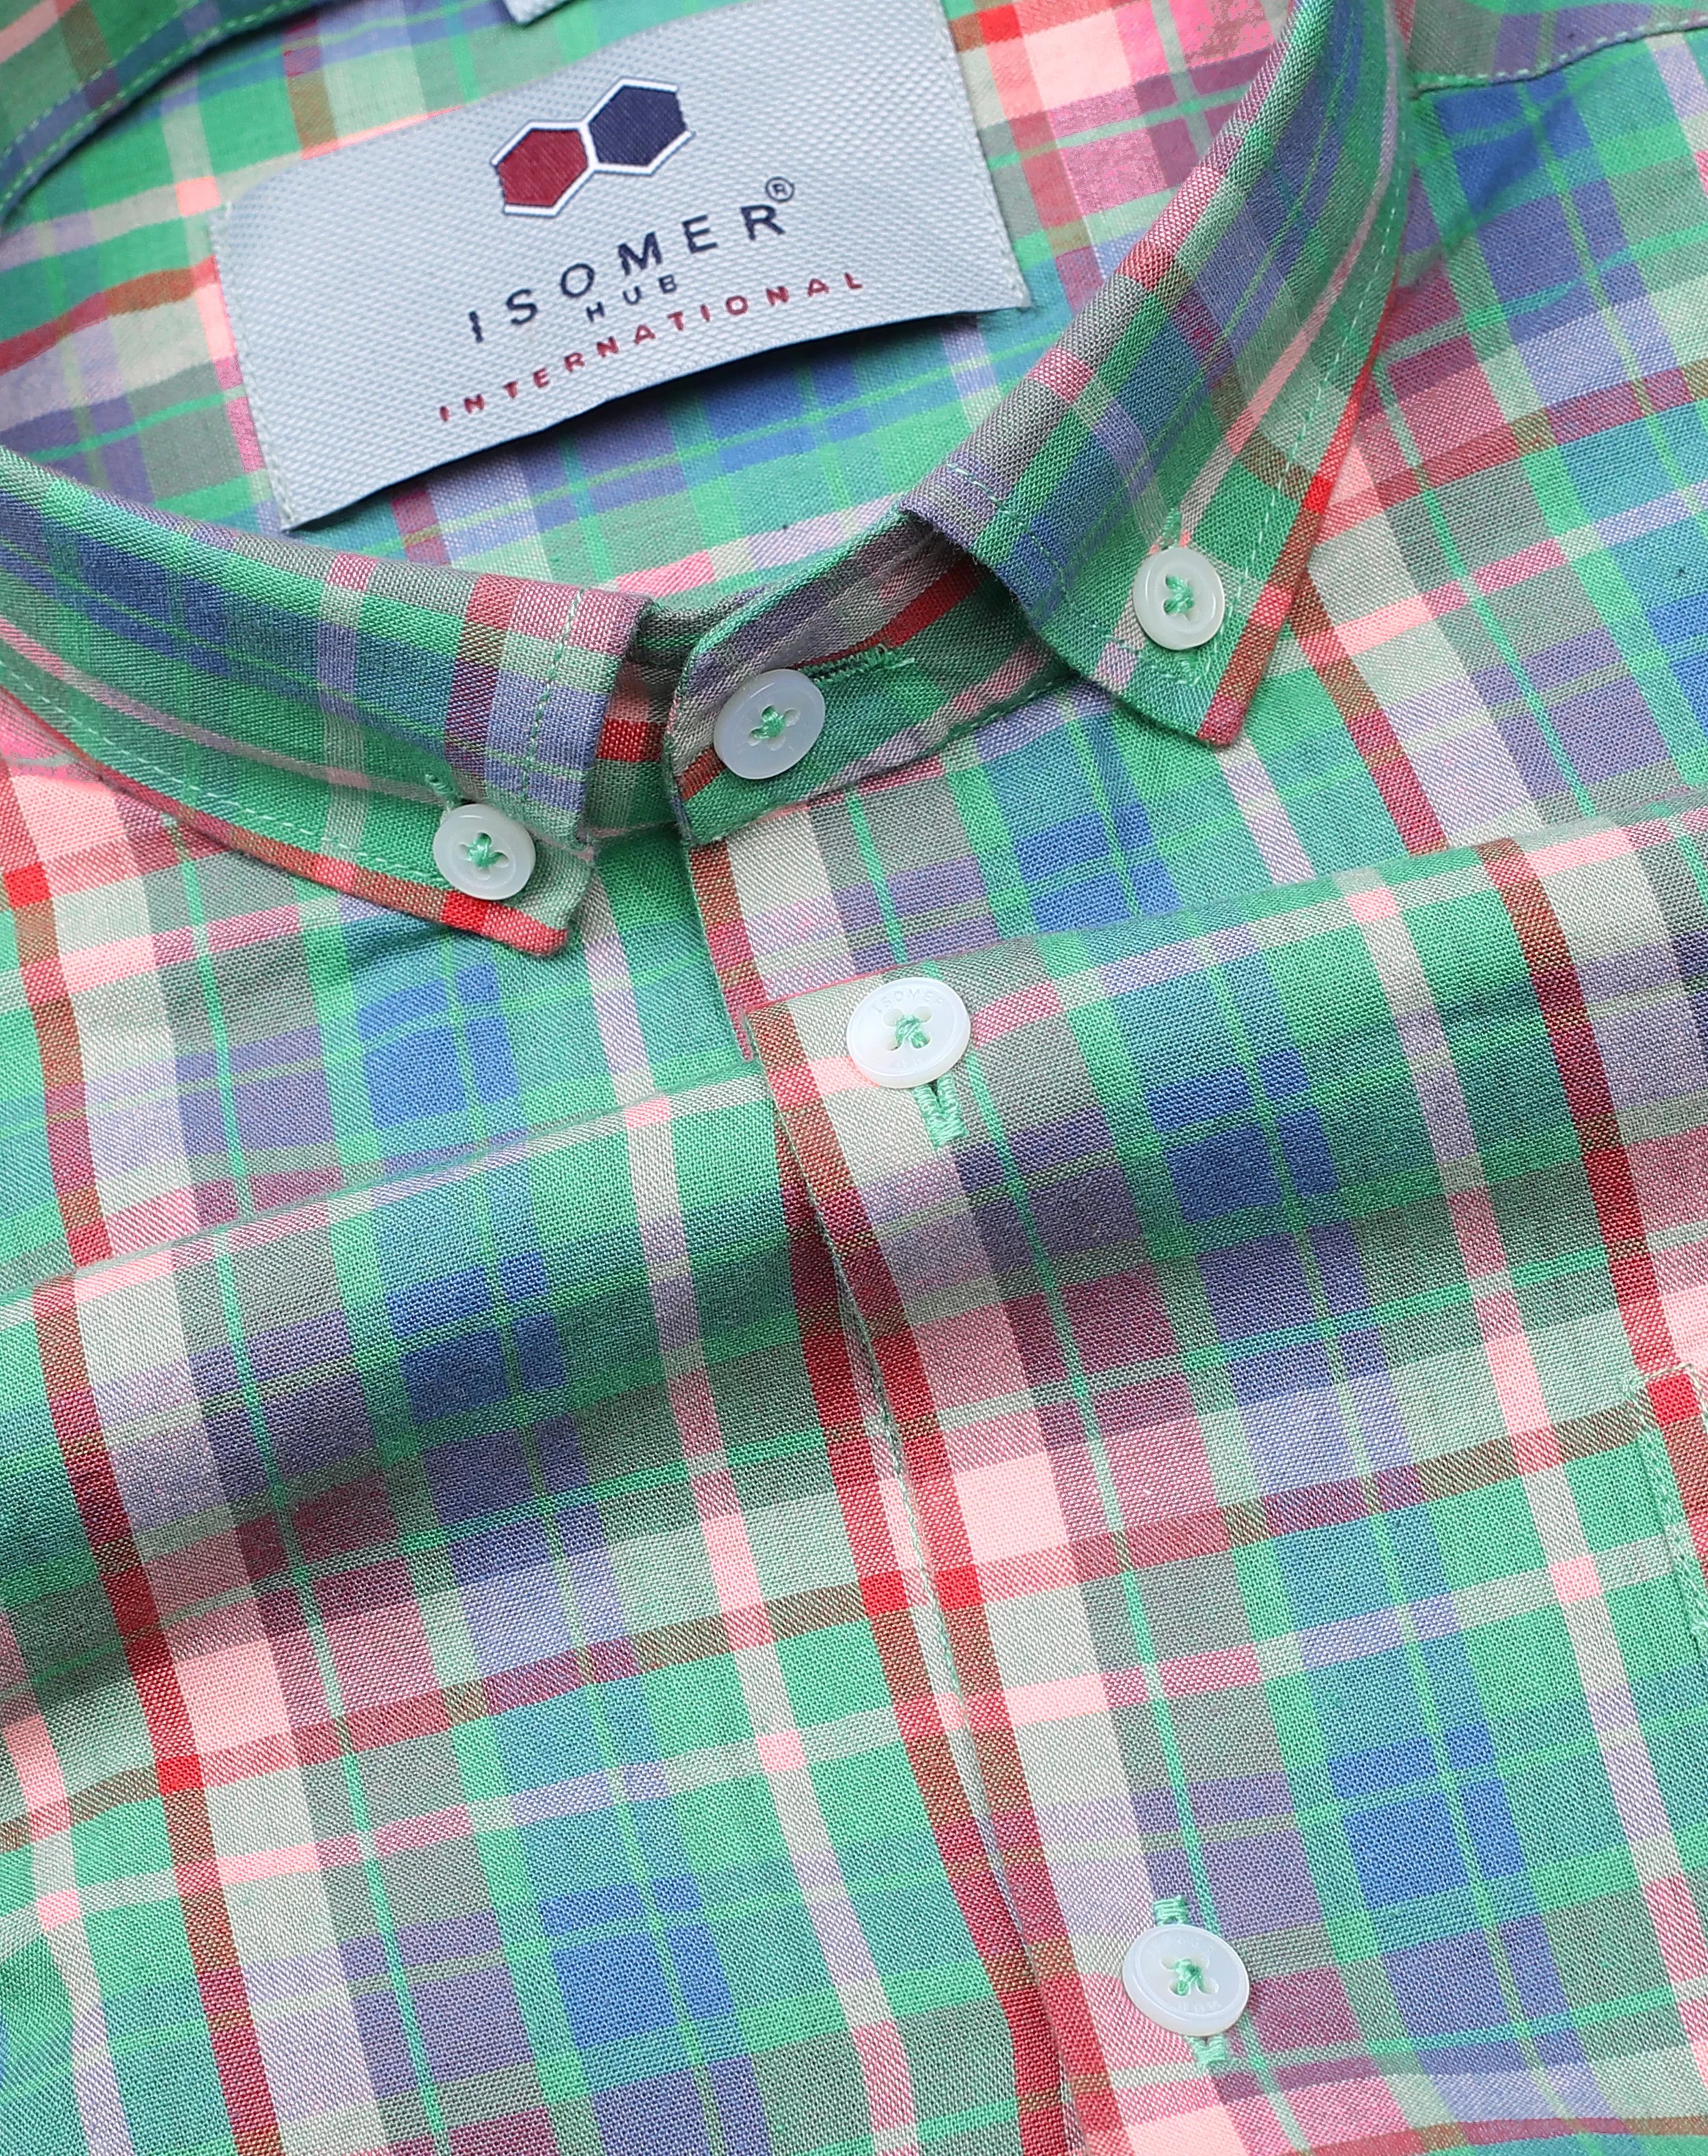 parrot green with multicolor check button down collar shirt